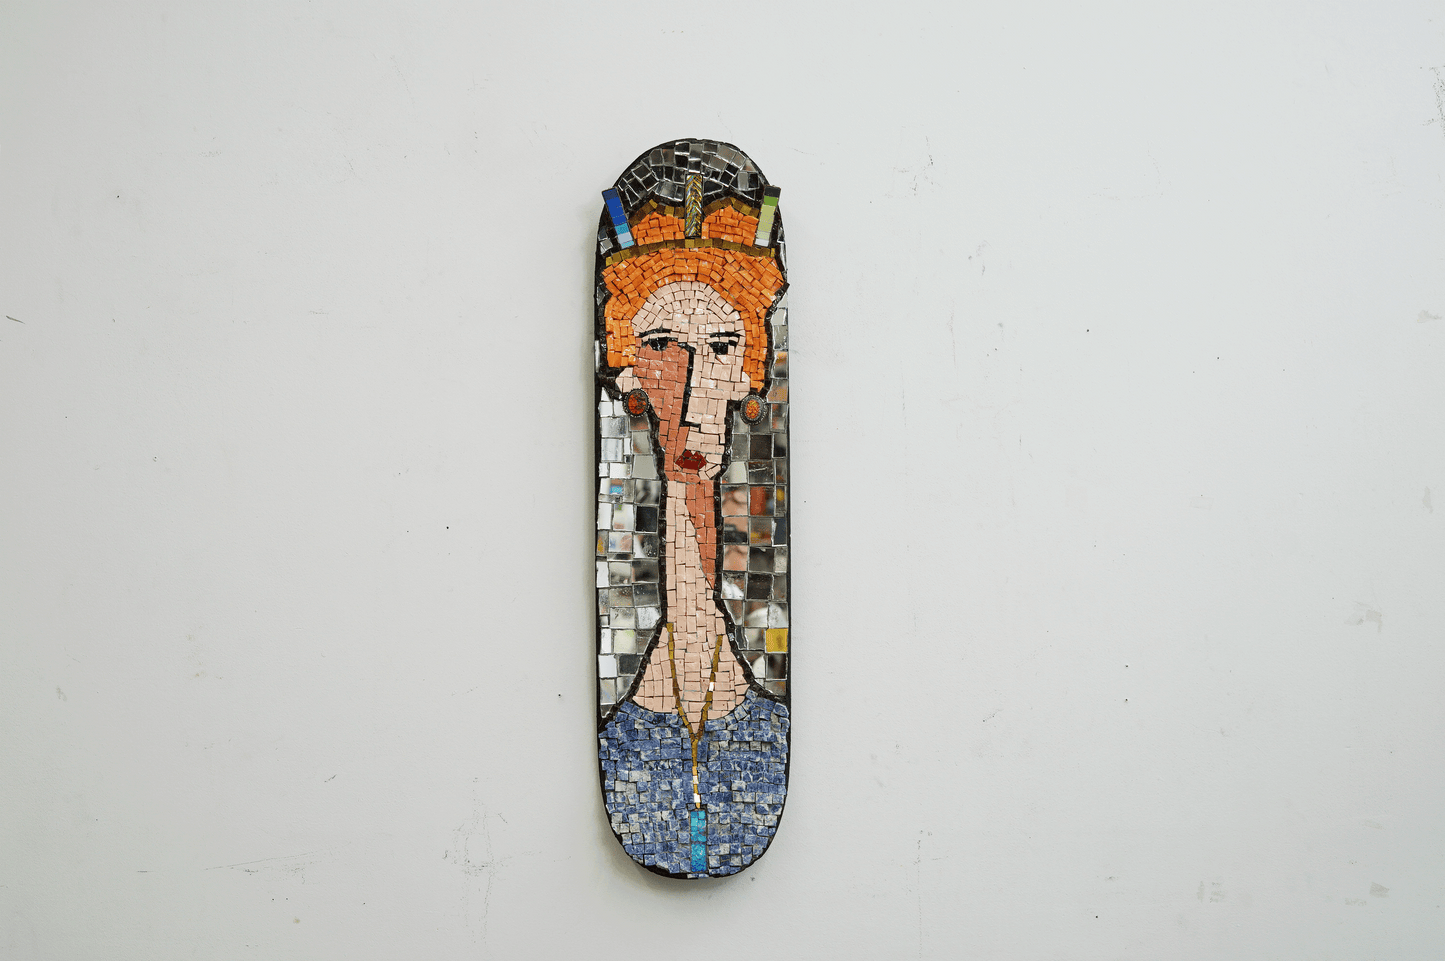 mosaic on a skateboard of a red hair woman with a crown and jewels